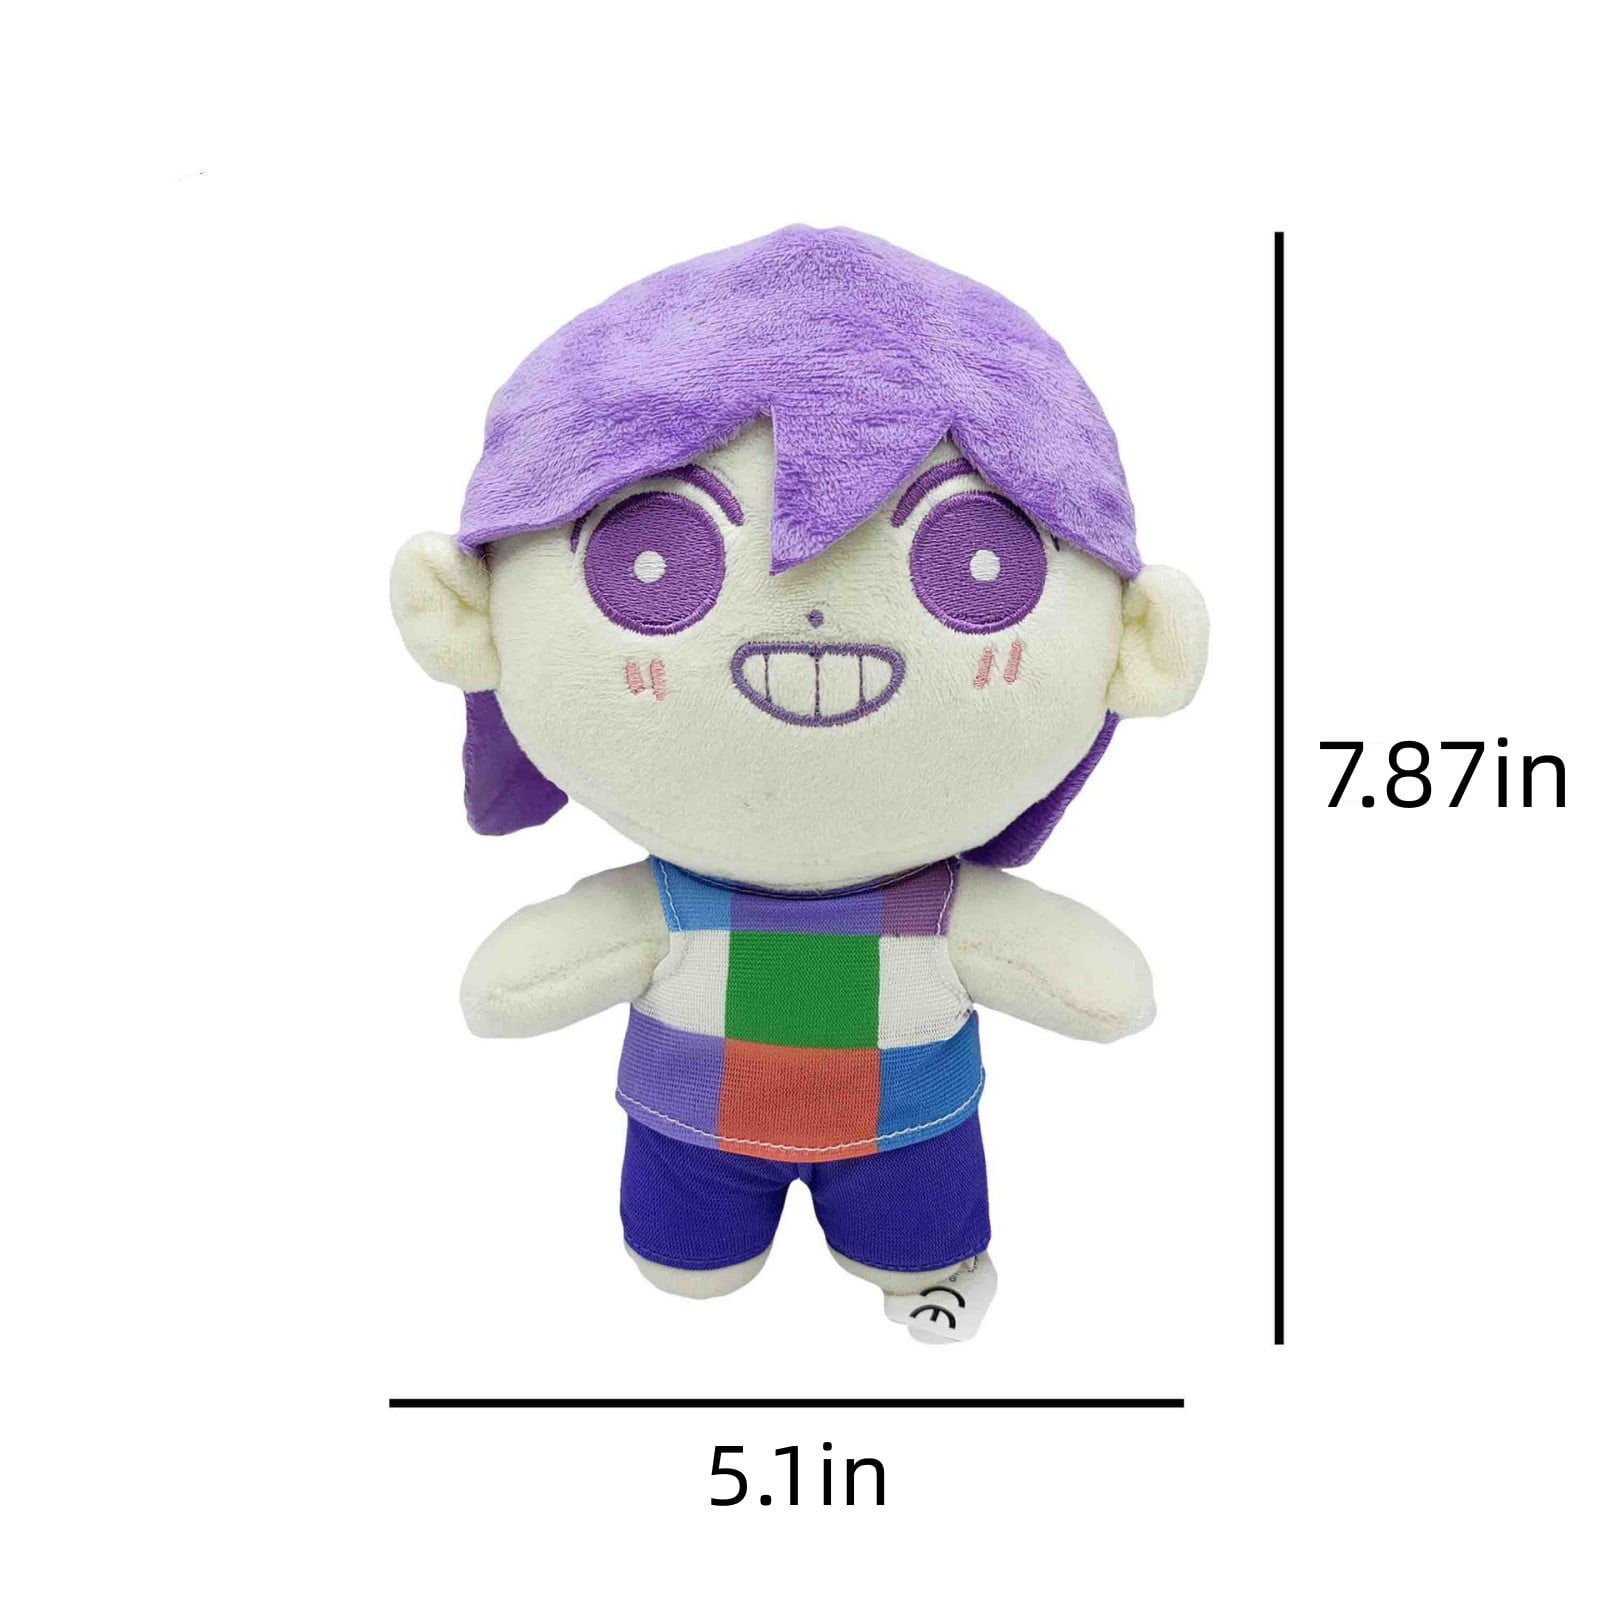 Sweetheart Omori Plush Toy Doll，10 Inches Realistic Restoration Horror Game  Anime Characters，Stuffed Pillow Plushies Figure Cartoon Toys for Kids  Collection Game Lovers Cosplay Merch Props 